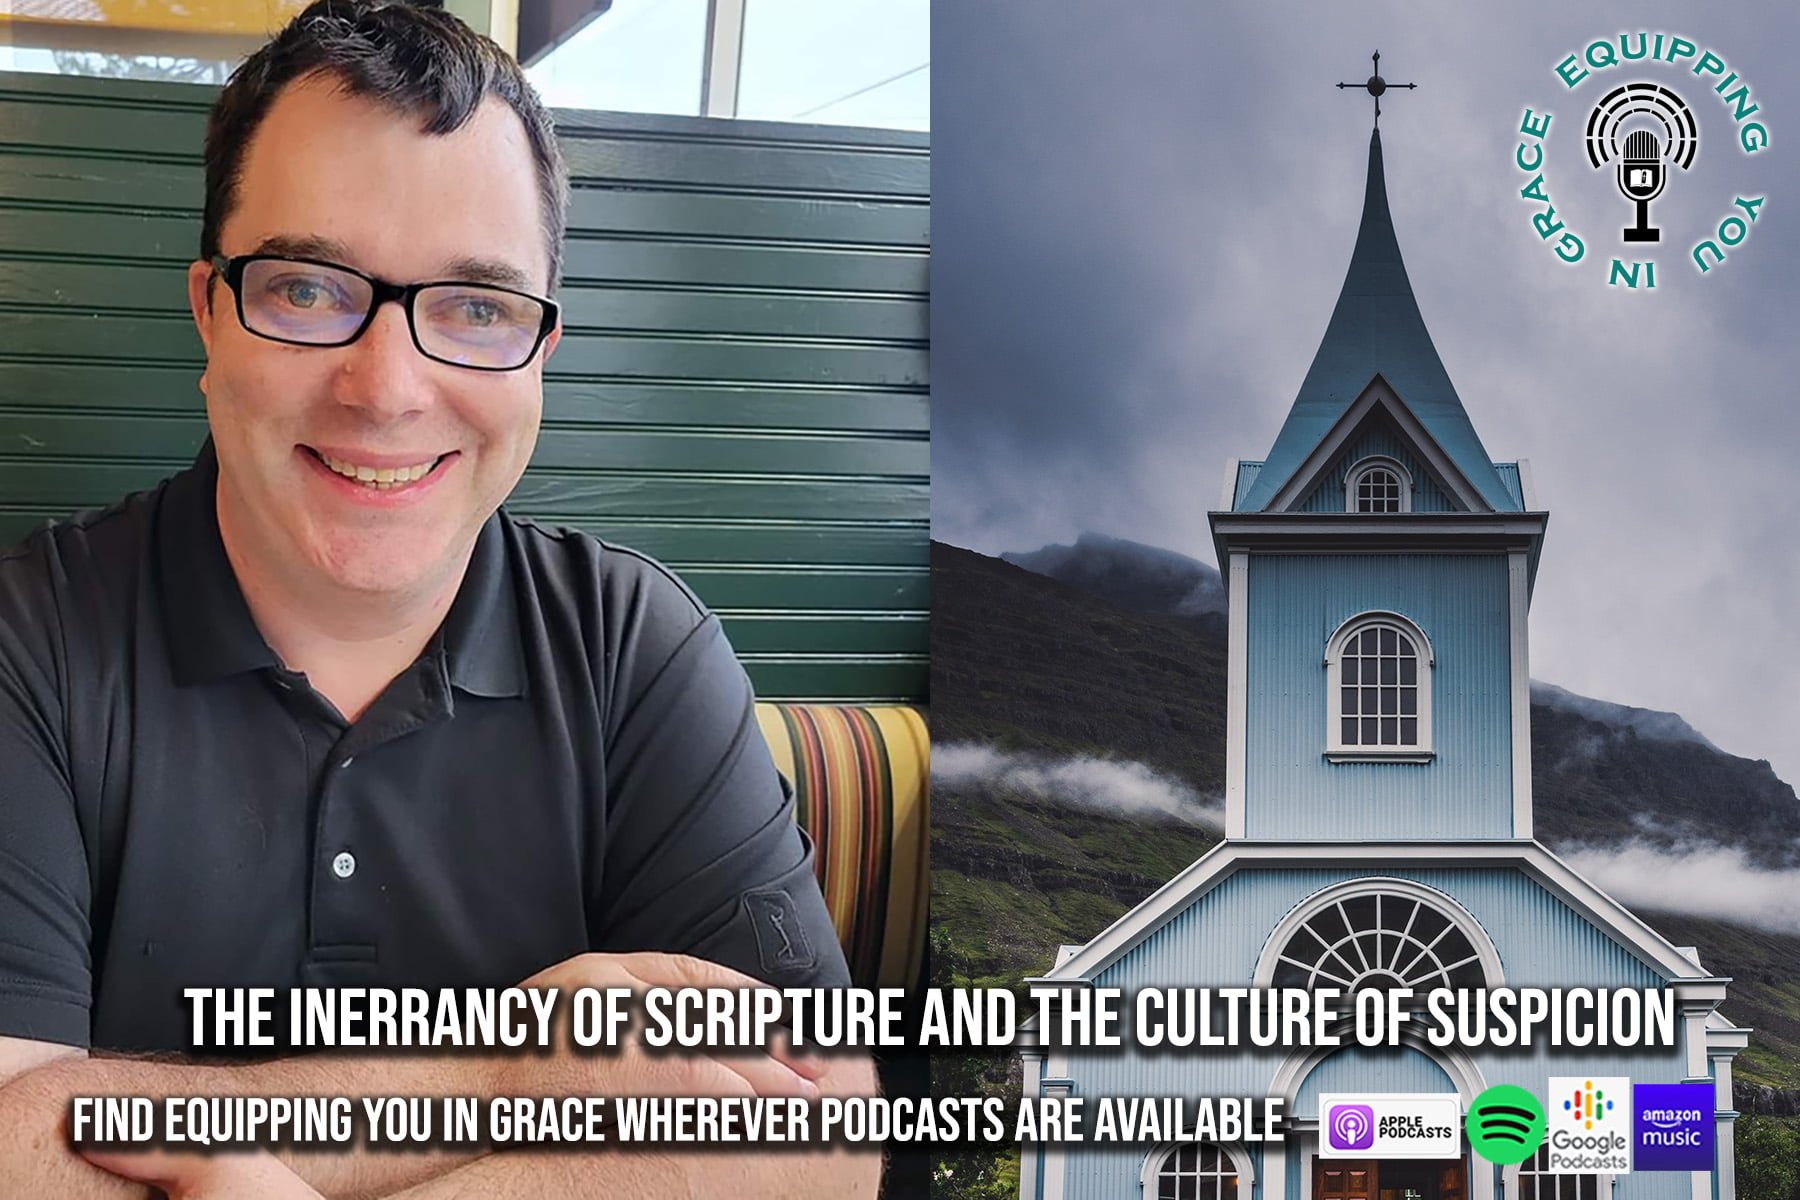 The Inerrancy of Scripture and the Culture of Suspicion 23